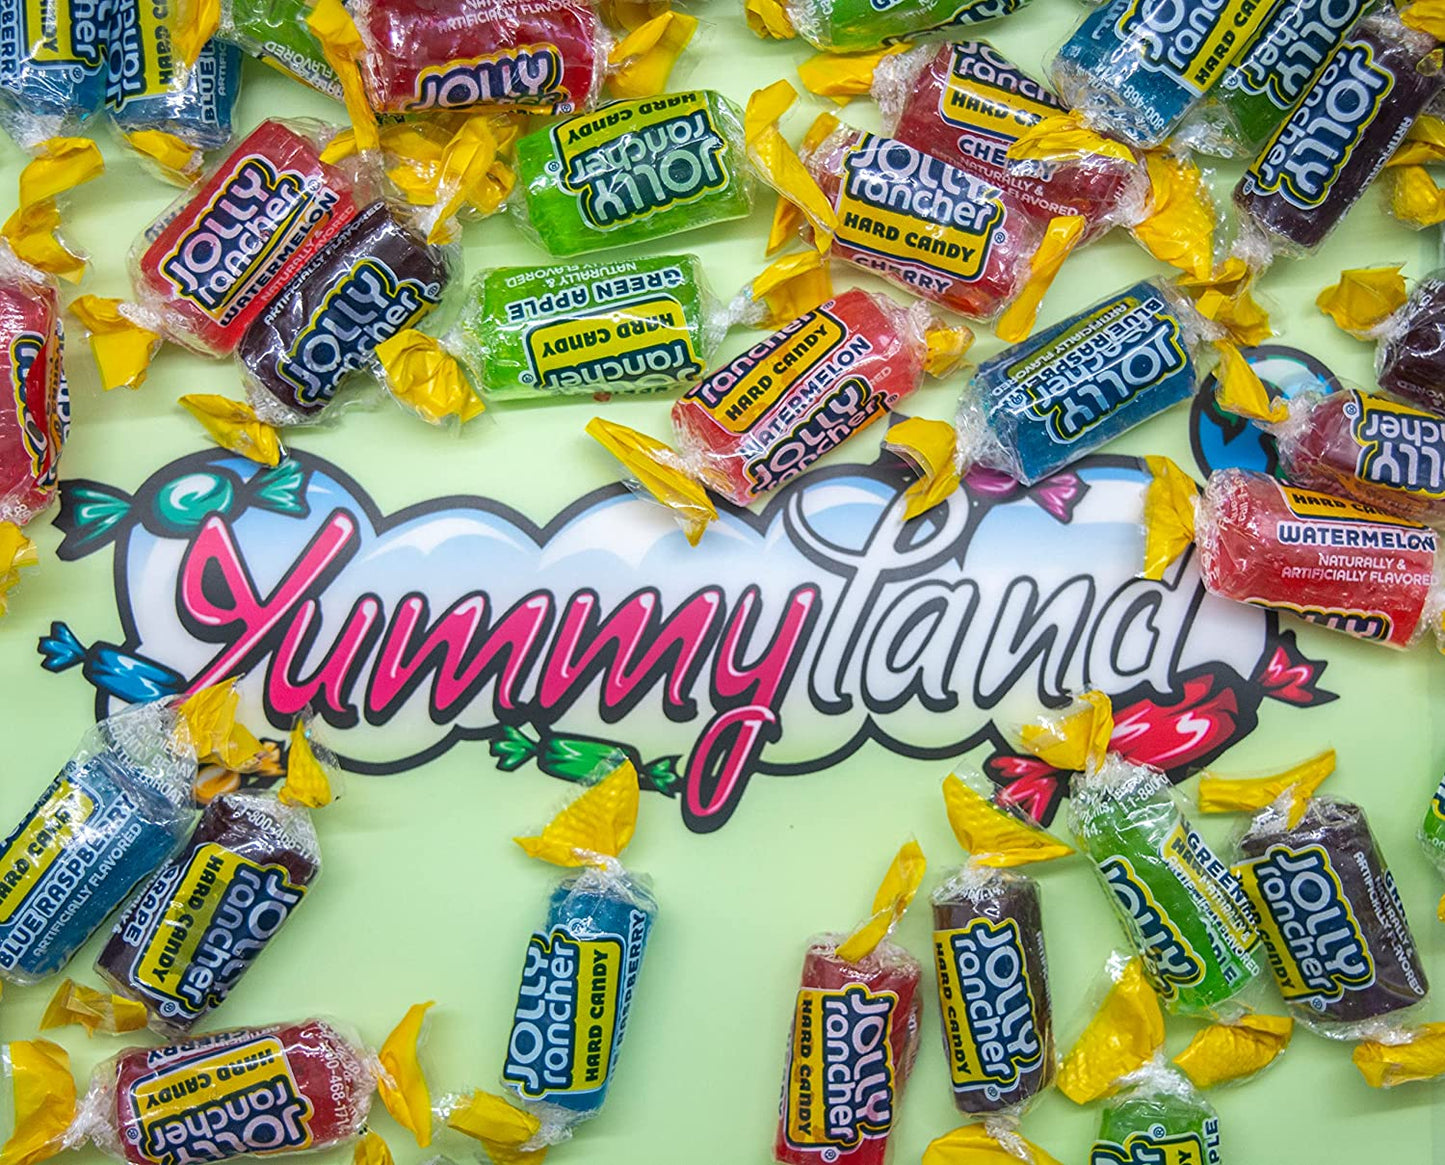 Jolly Rancher Assorted Flavors Hard Candy, Individually Wrapped, Bulk Candy Bag